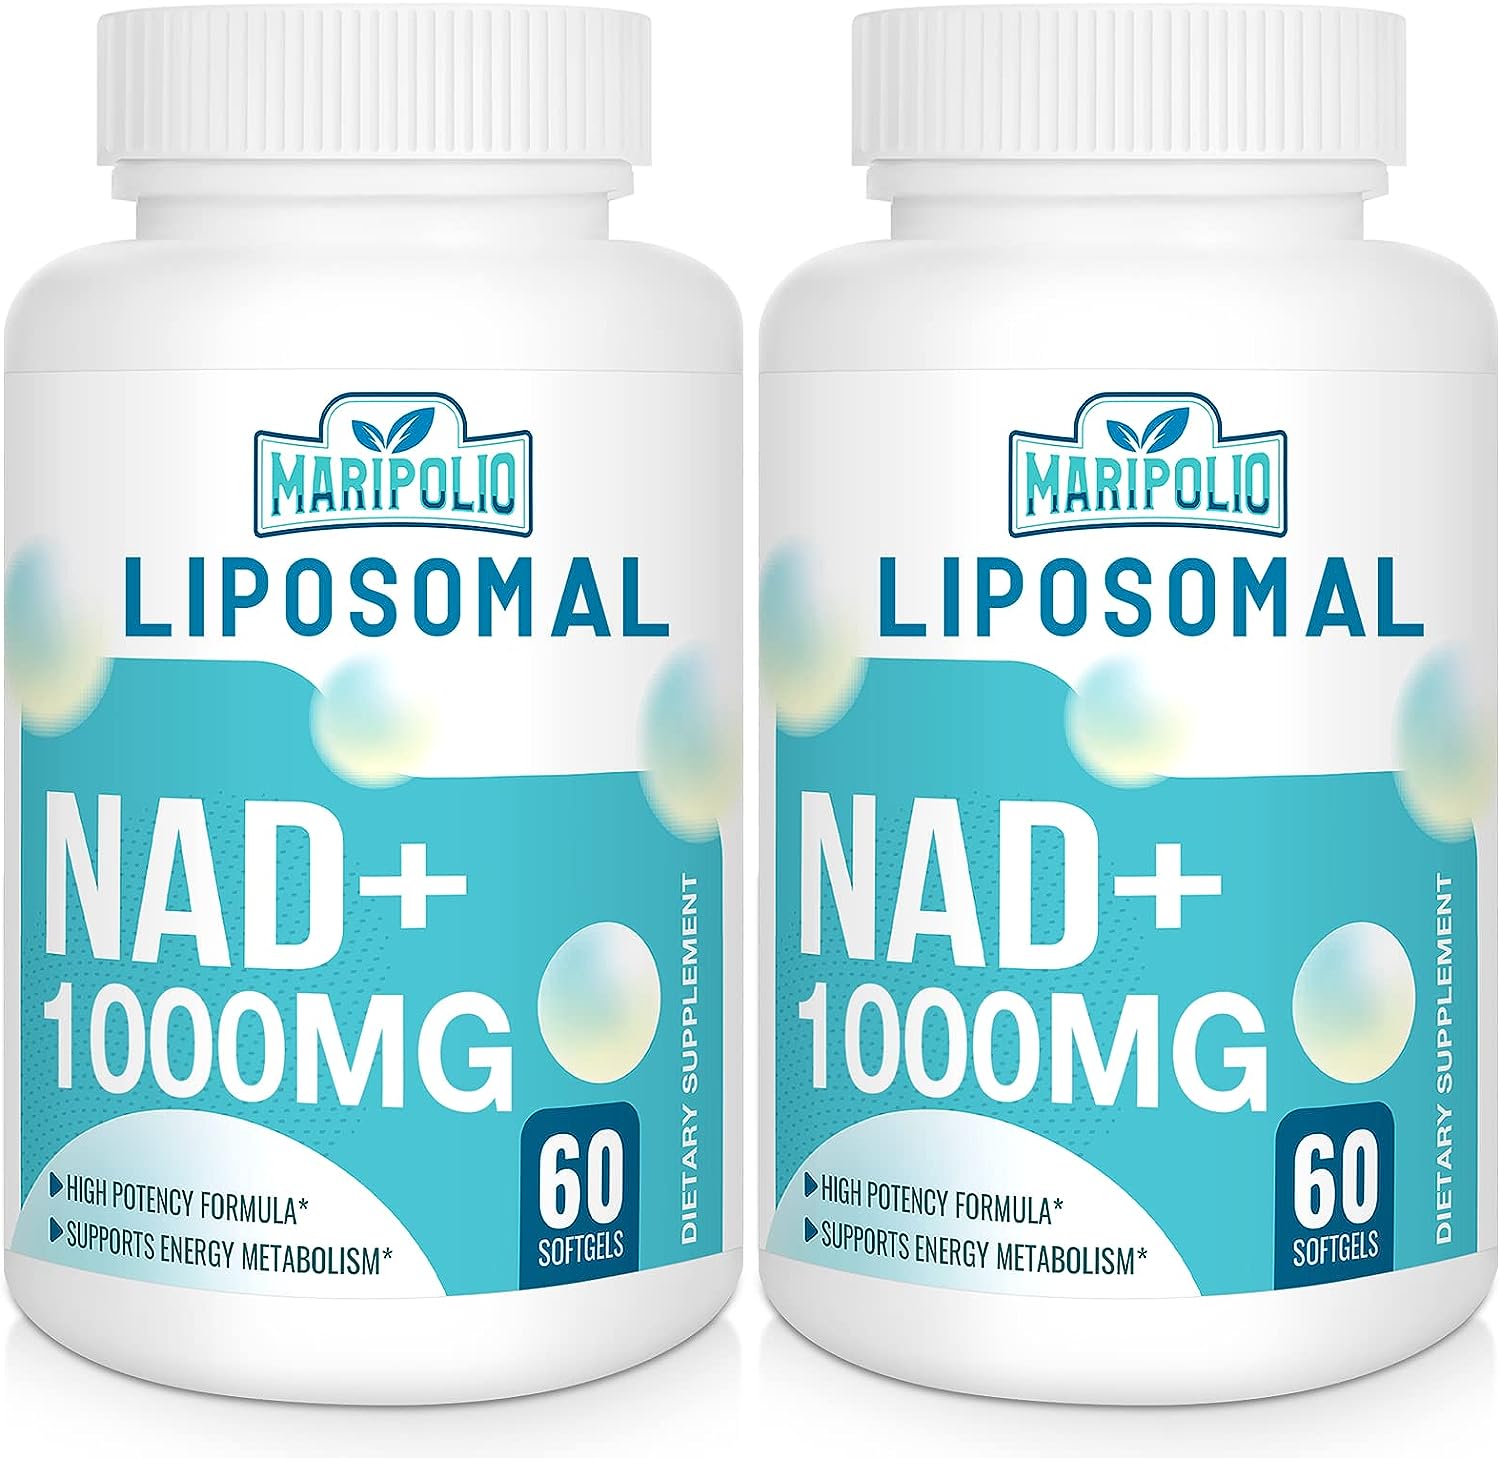 Maripolio 社リポソーム NAD 1粒あたり500mg配合 サプリメント 60粒入りが2本 Liposomal NAD Supplement 1000 mg Highest NAD Pontecy Max Absorption Pure Energy and DNA Repair, Aging Defense, Brain Function 120 Day Supply